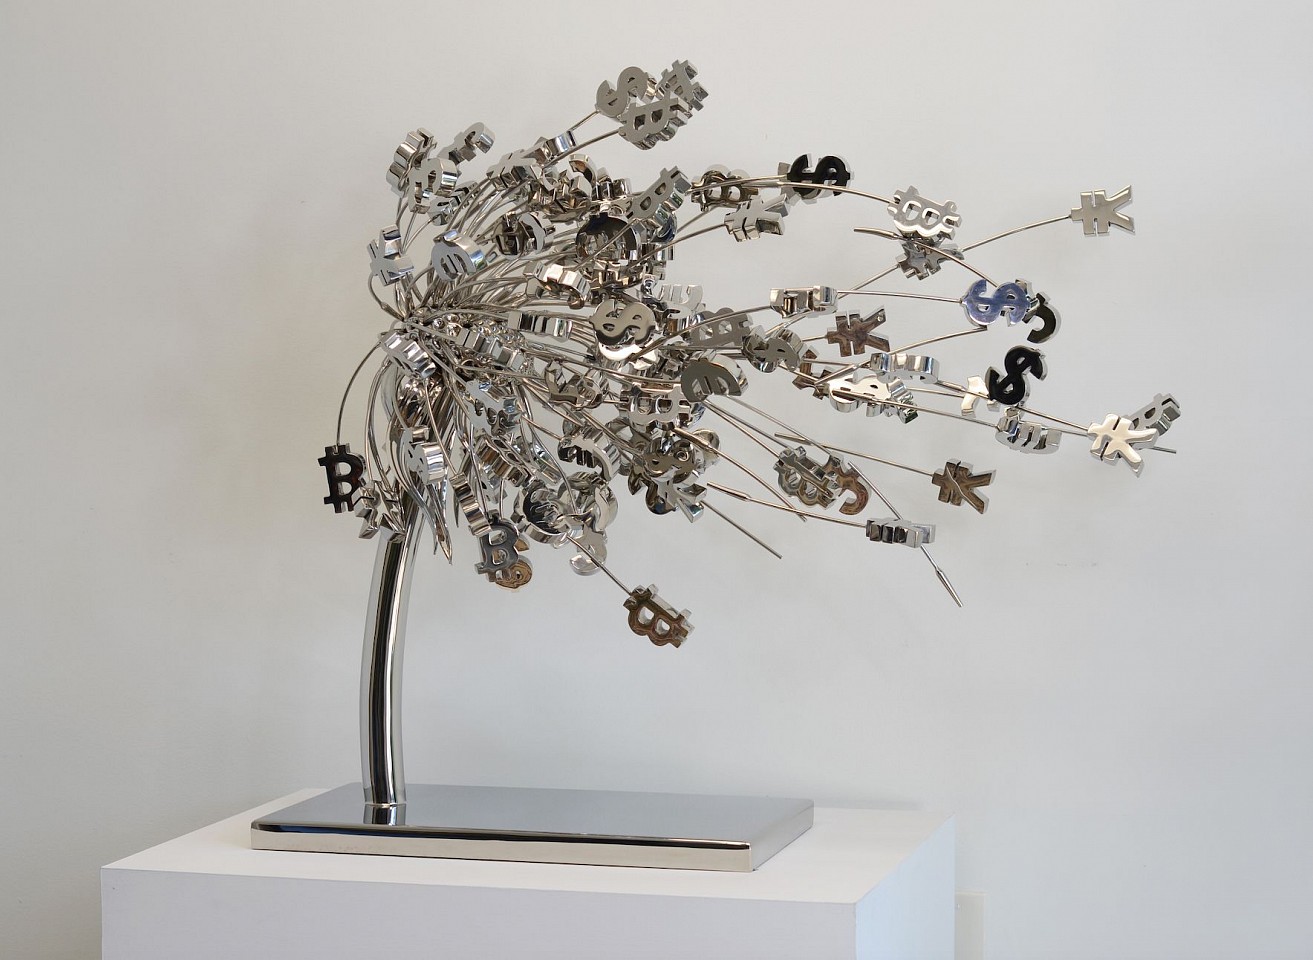 Alexi Torres, Wish For Success, 2023
316 Marine Grade Stainless Steel Sculpture, 43 x 45 x 26 in.